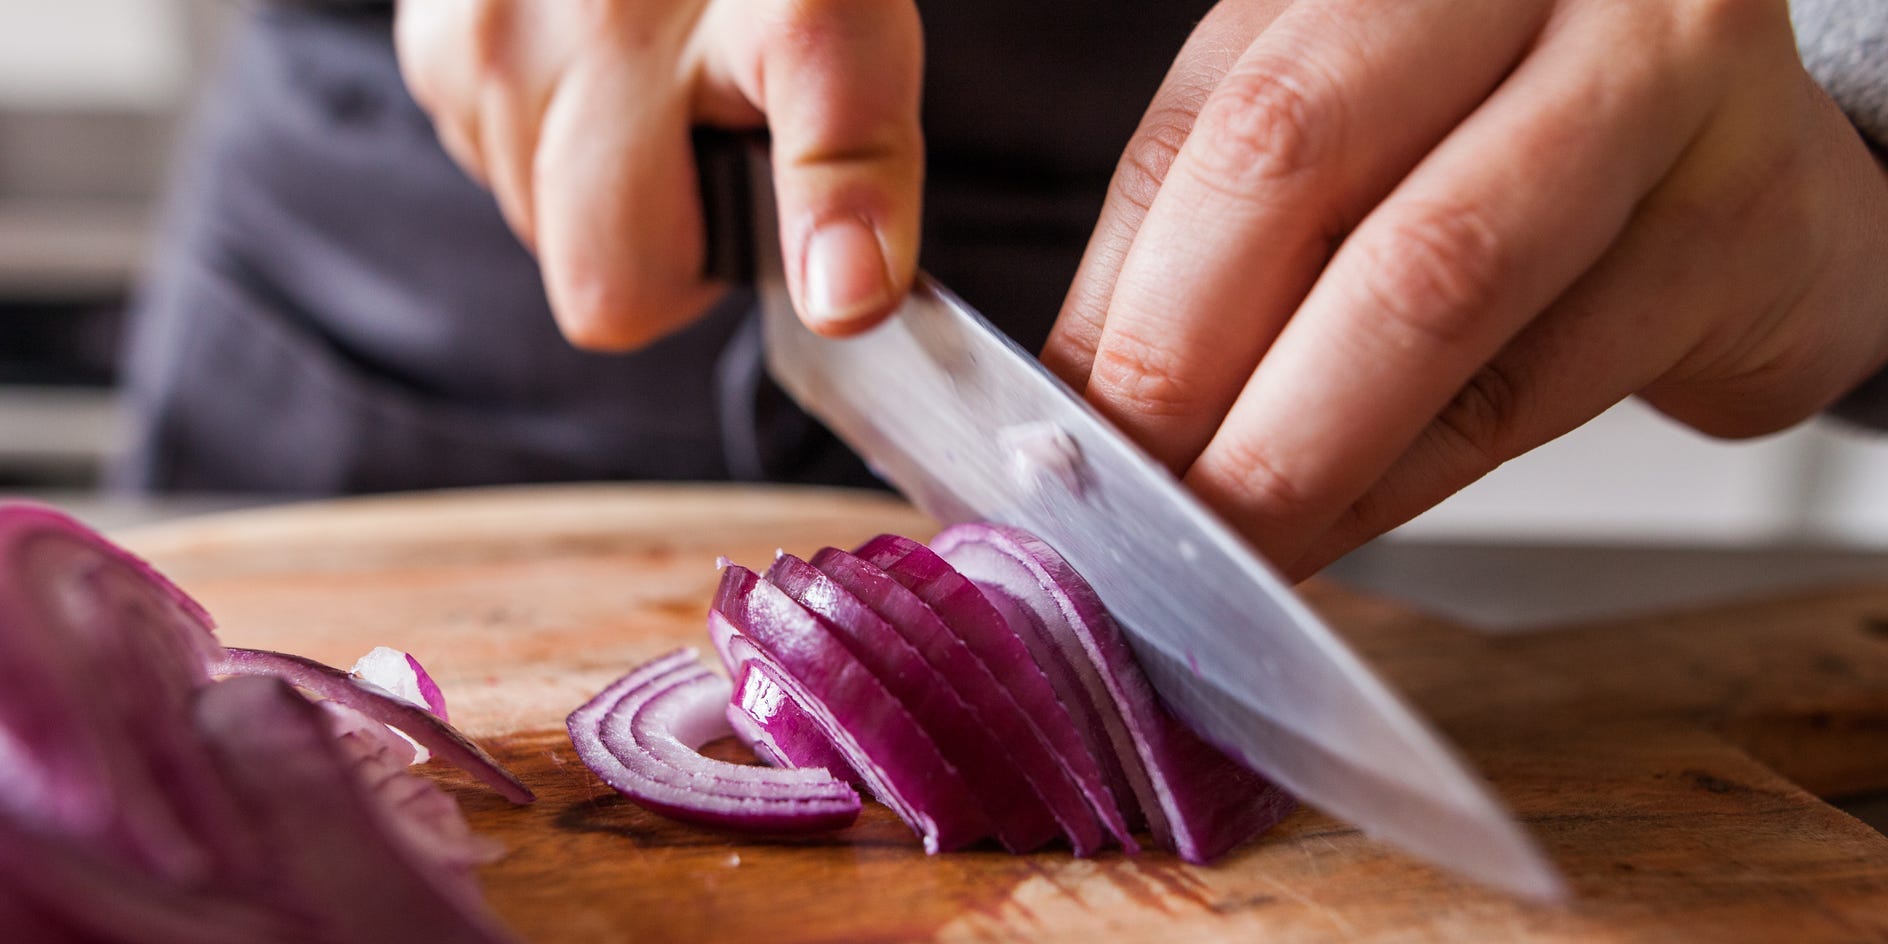 How to Cut an Onion, With Videos for Thinly Slicing, Dicing, and Cutting  Into Rings